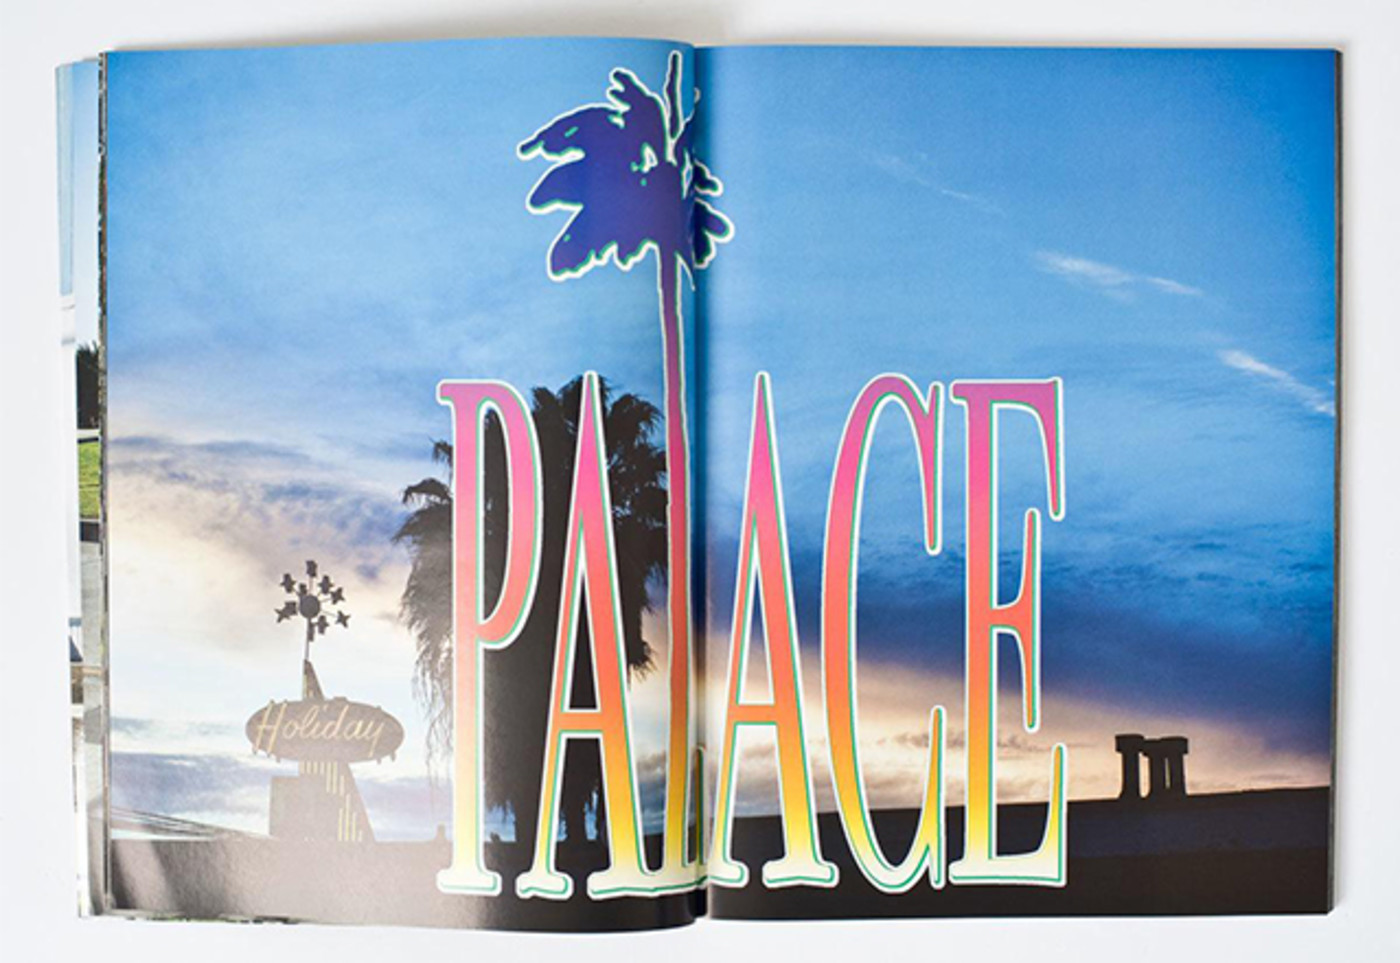 Get A Sneak Peek At The First Issue Of The New Palace Skateboards